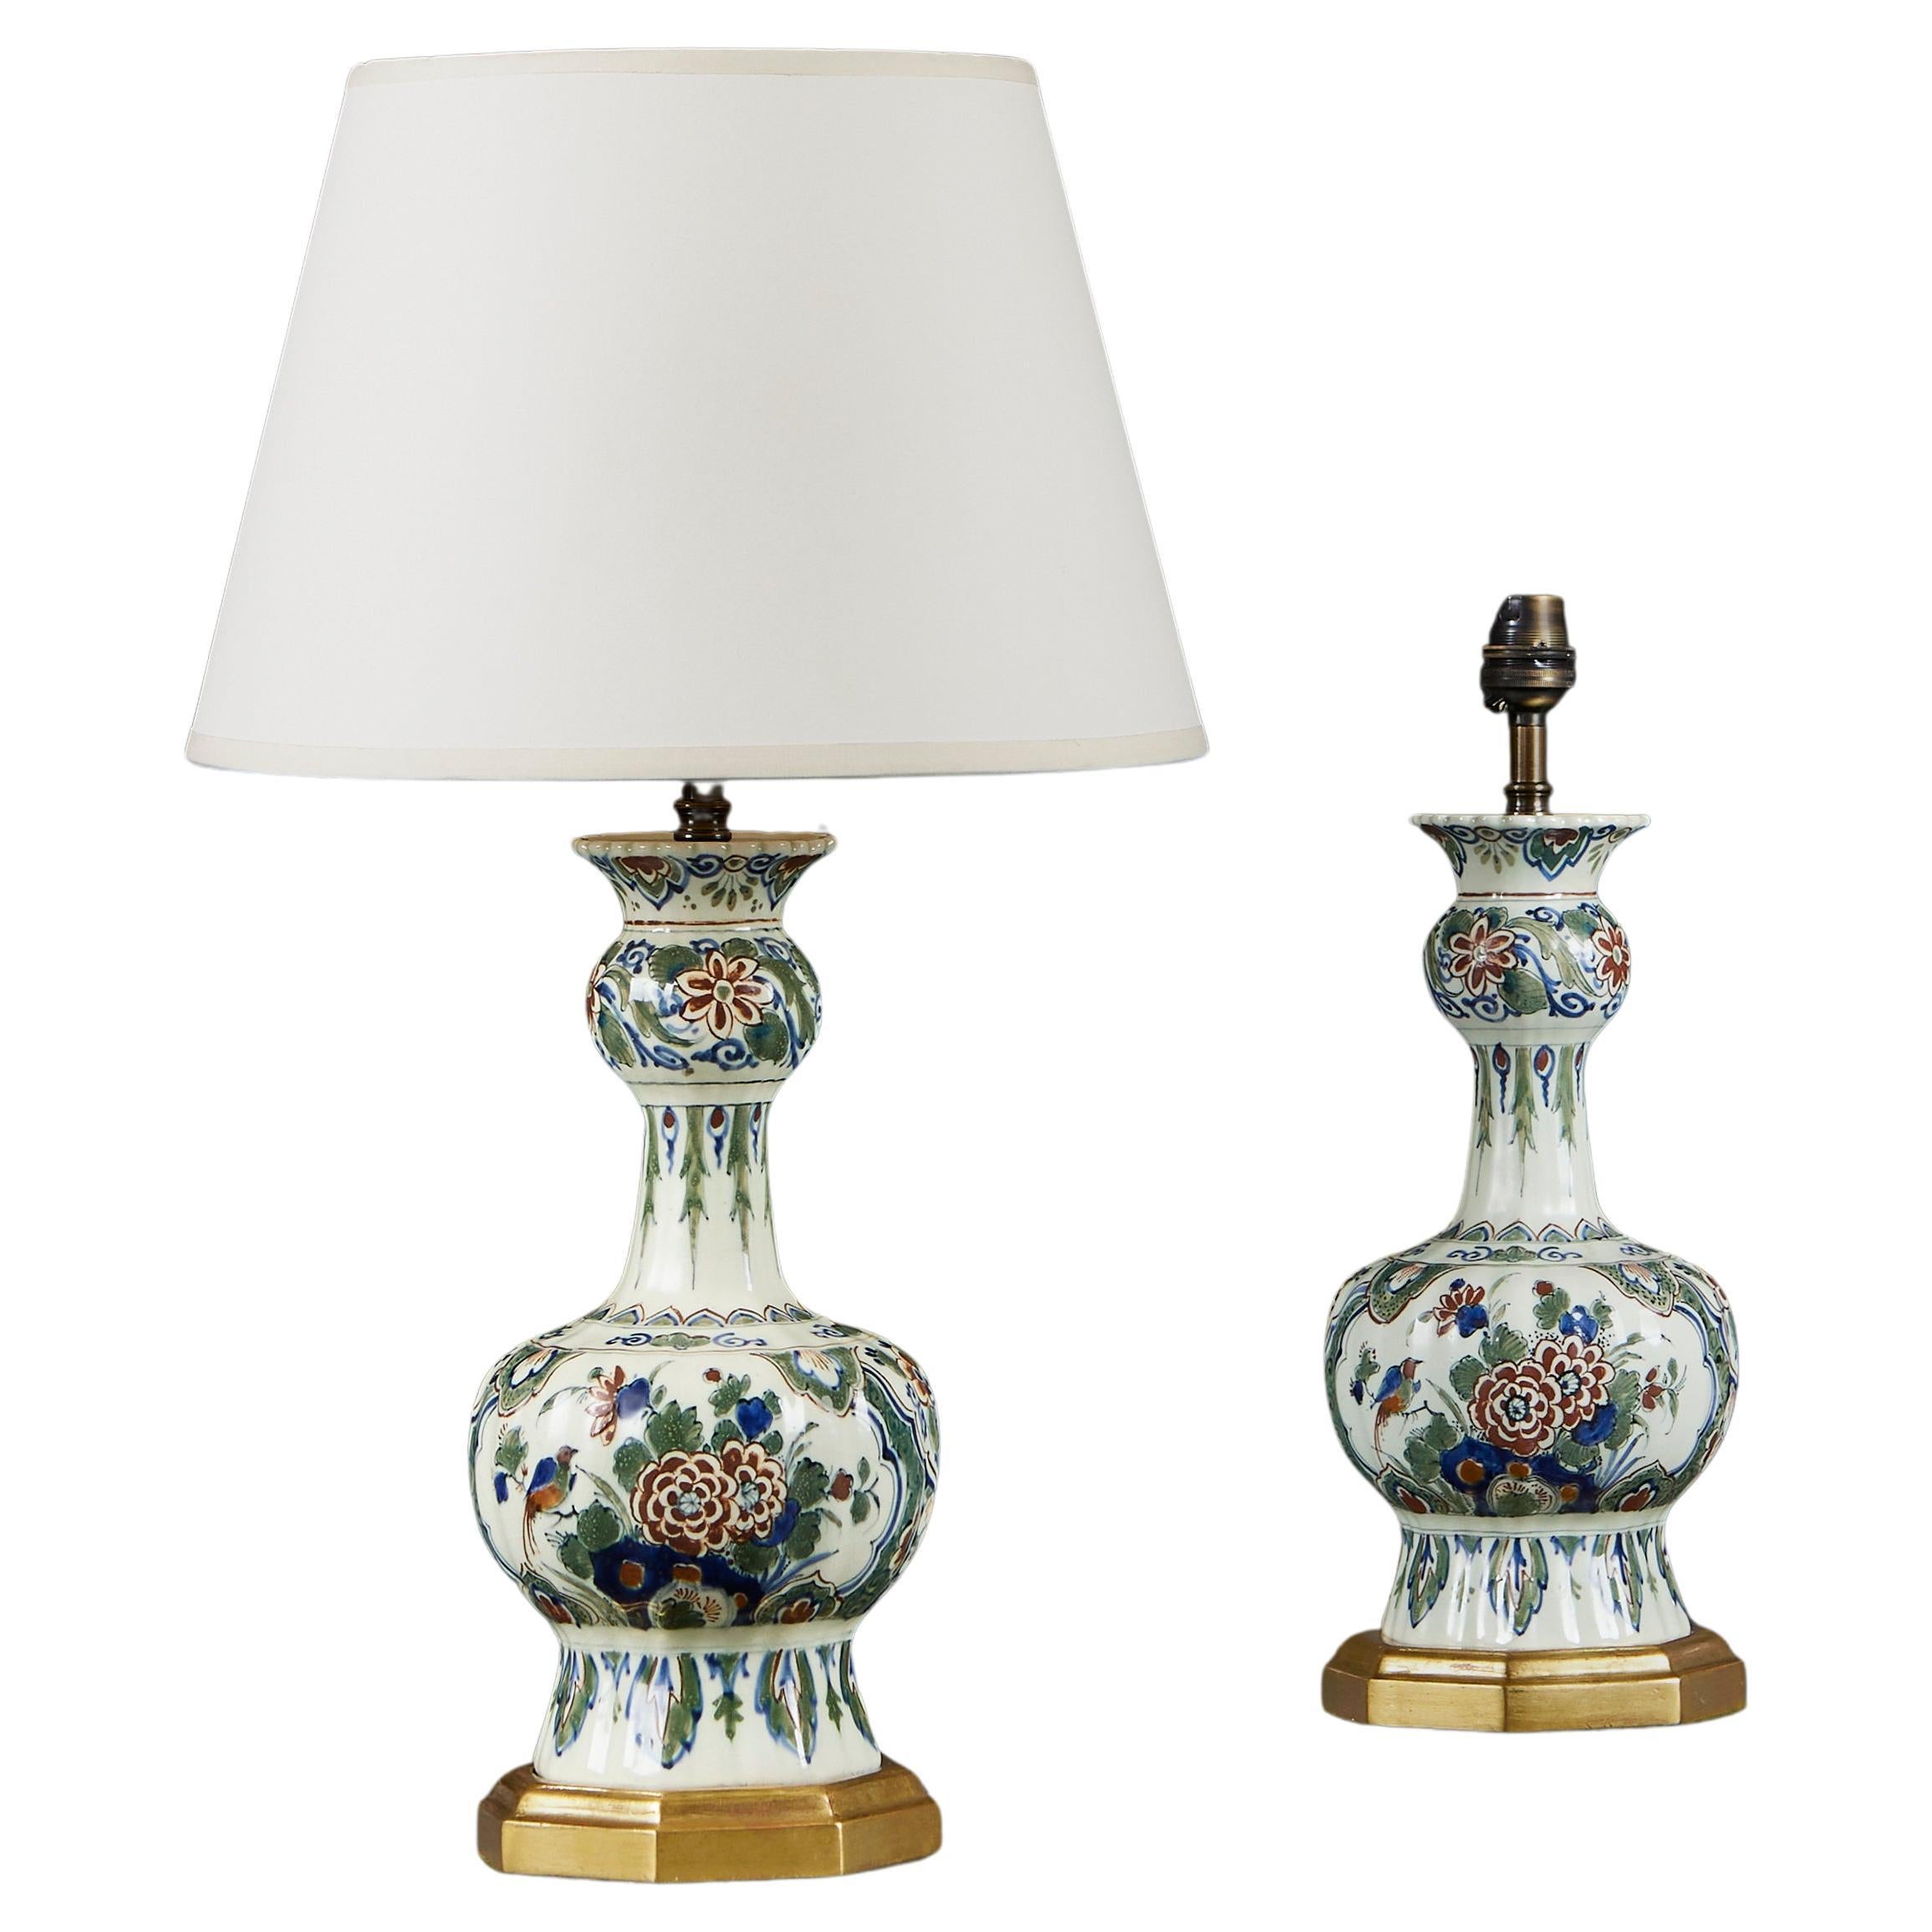 A Pair Of Polychrome Delft Lamps